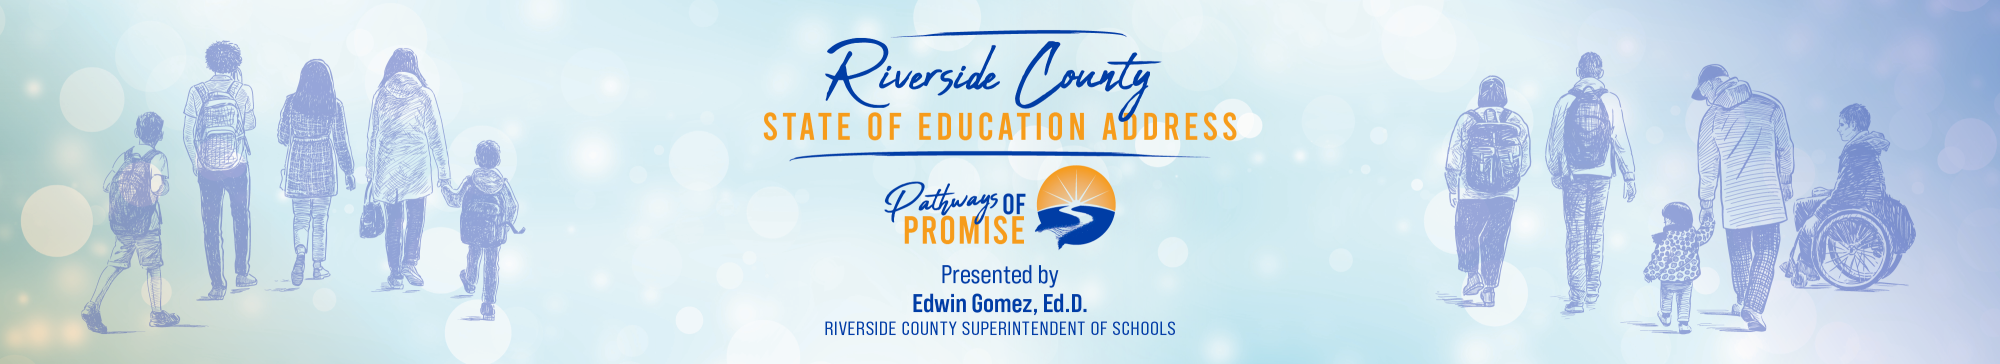 Riverside County State of Edcuation Address, Pathways of Promise, Presented by Edwin Gomez, Ed.D., Riverside County Superintendent of Schools